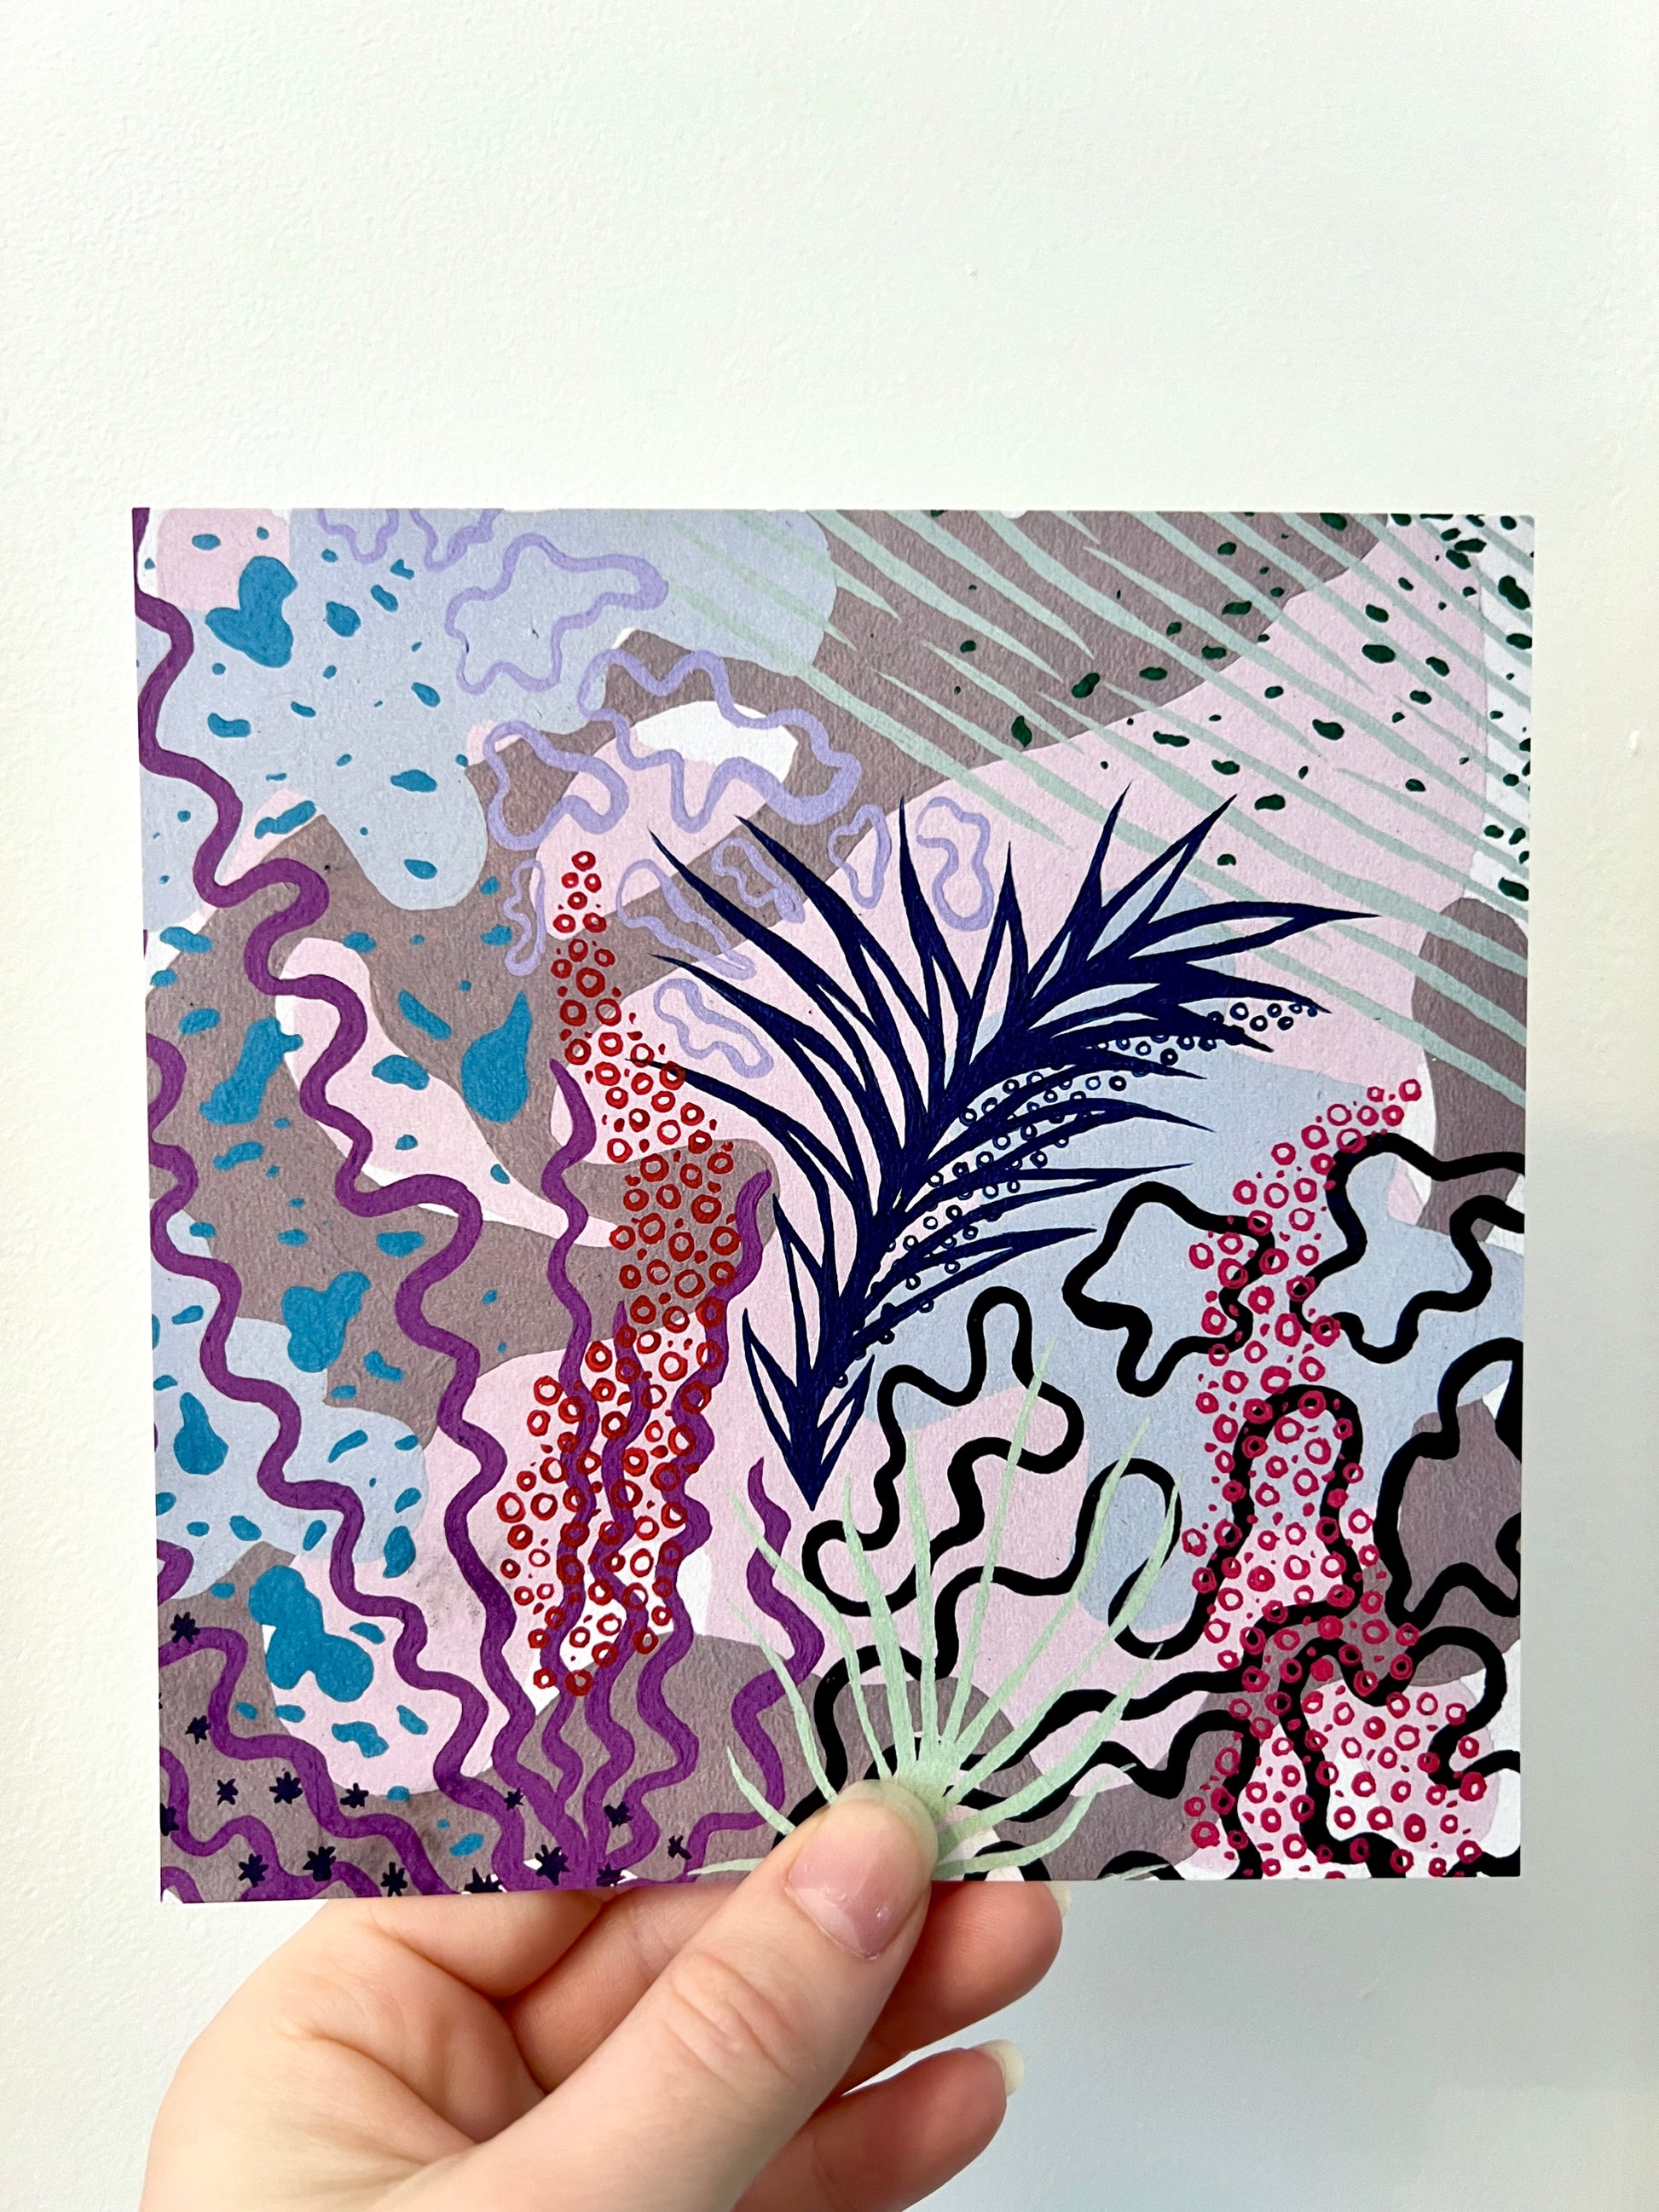 A hand holding a square print against a white wall. The print has shades of purple and pink with red and bright pink circles forming shapes like fox glove flowers. There are swirling lines and outlined shapes across the image.